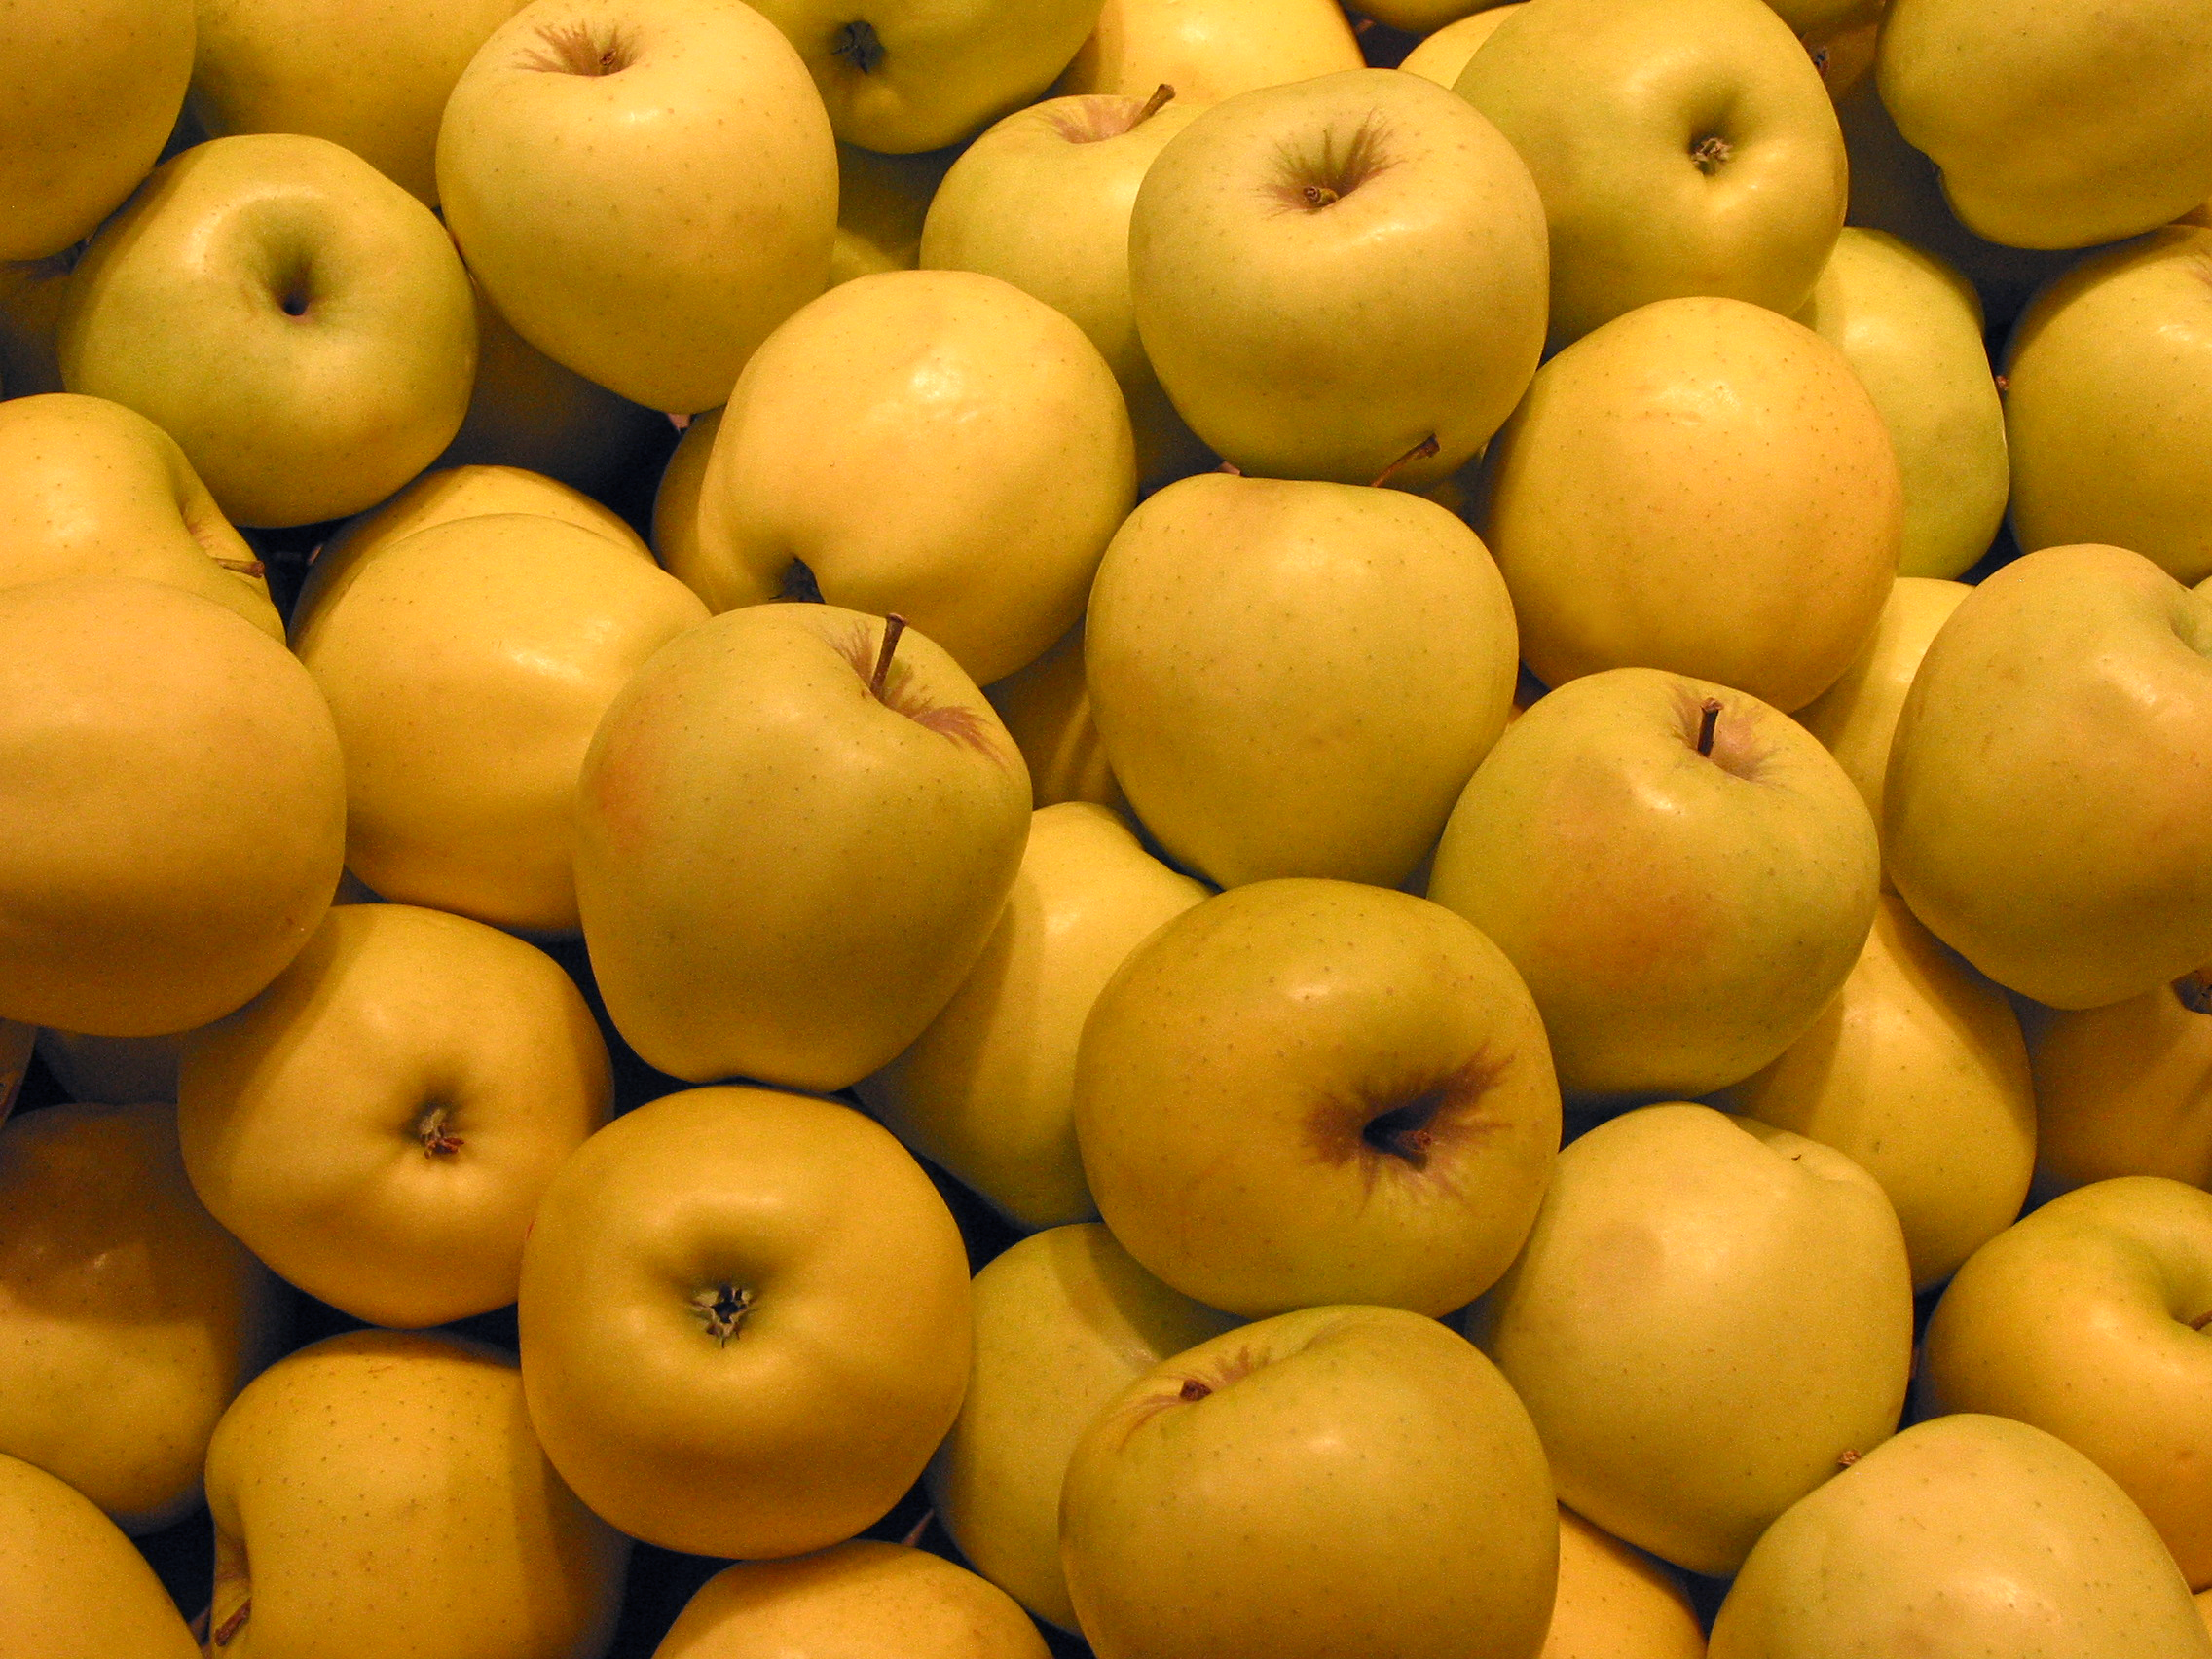 FREE Apples Photo, Green Apples Picture, Yellow Apples Image ...